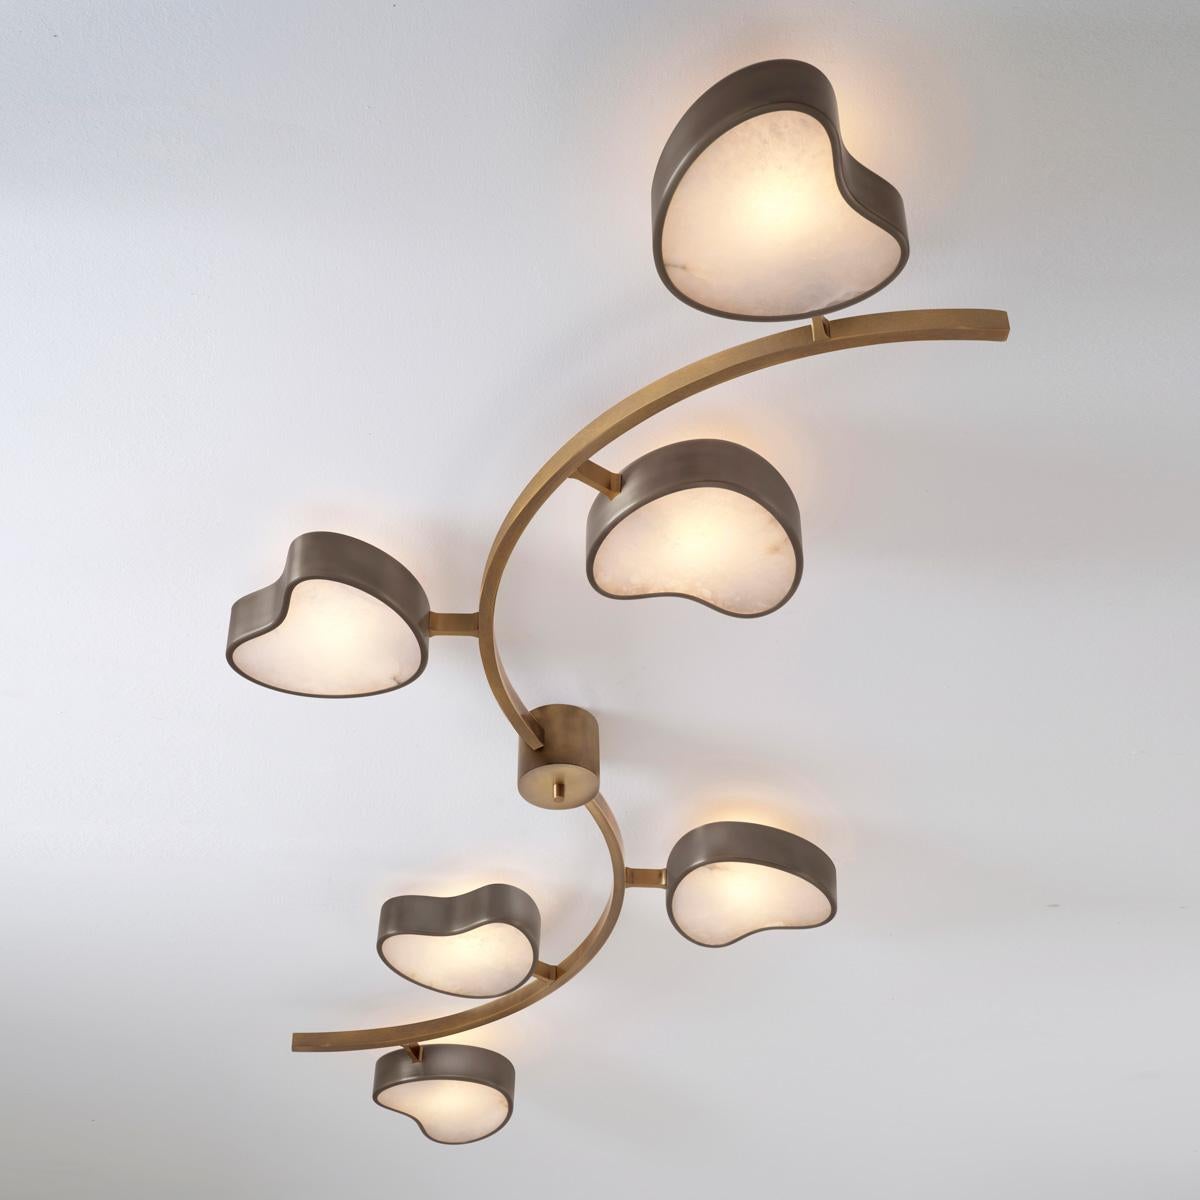 Cuore N.6 Ceiling Light by Gaspare Asaro. Satin Brass and Sand White Finish For Sale 5